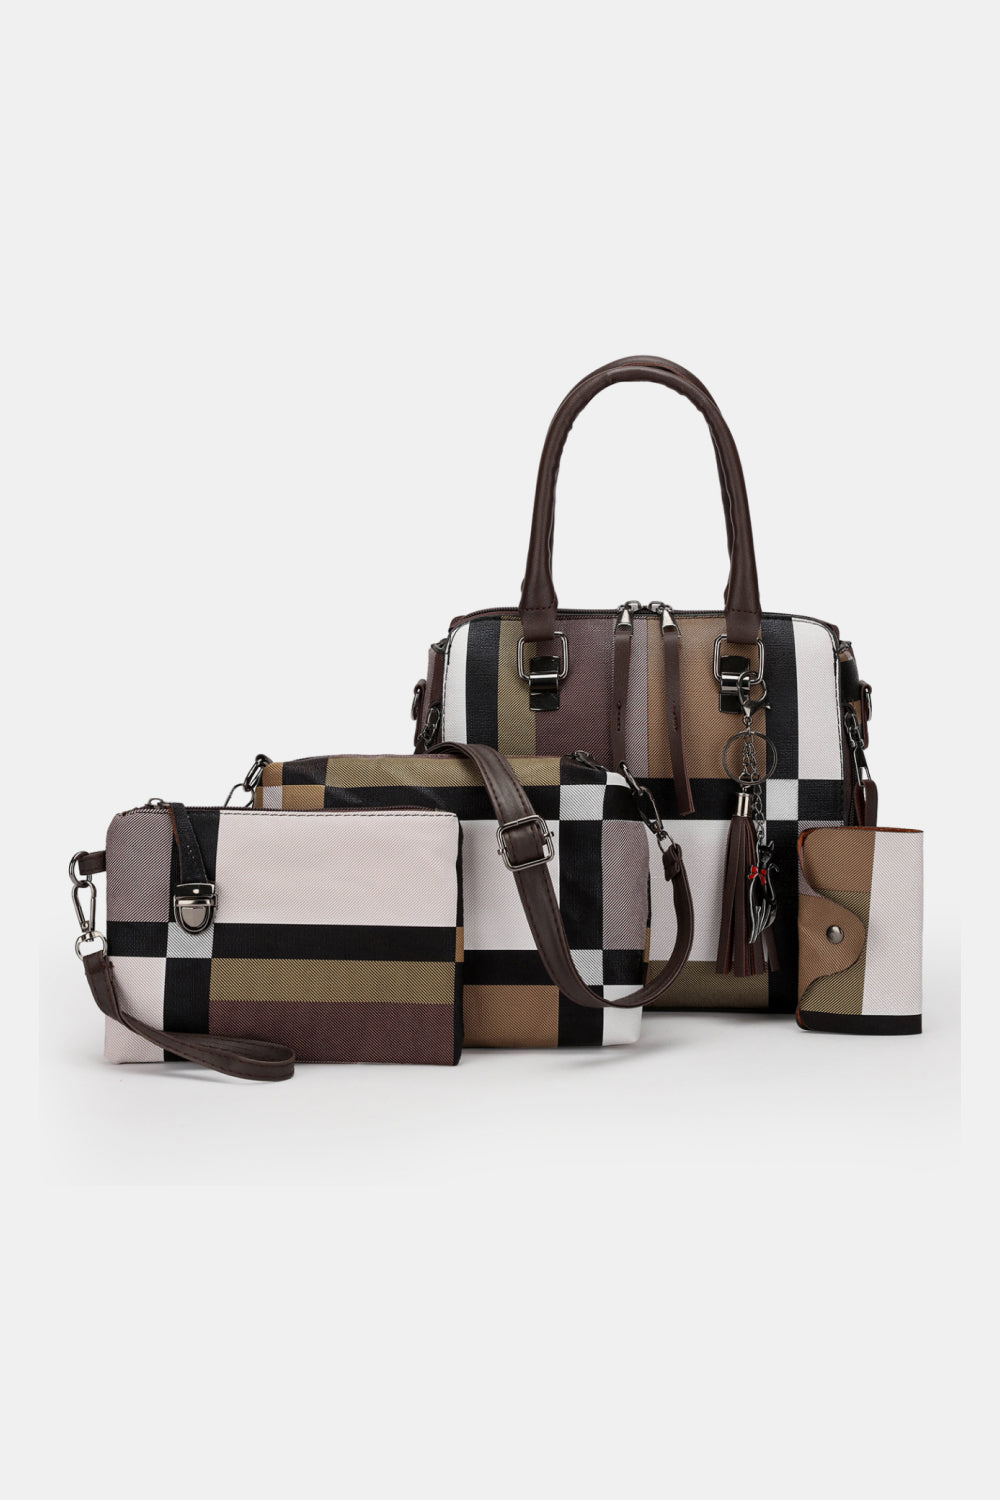 Multi-Color Bag:  PU Leather Bag Set Available in Several Color Options